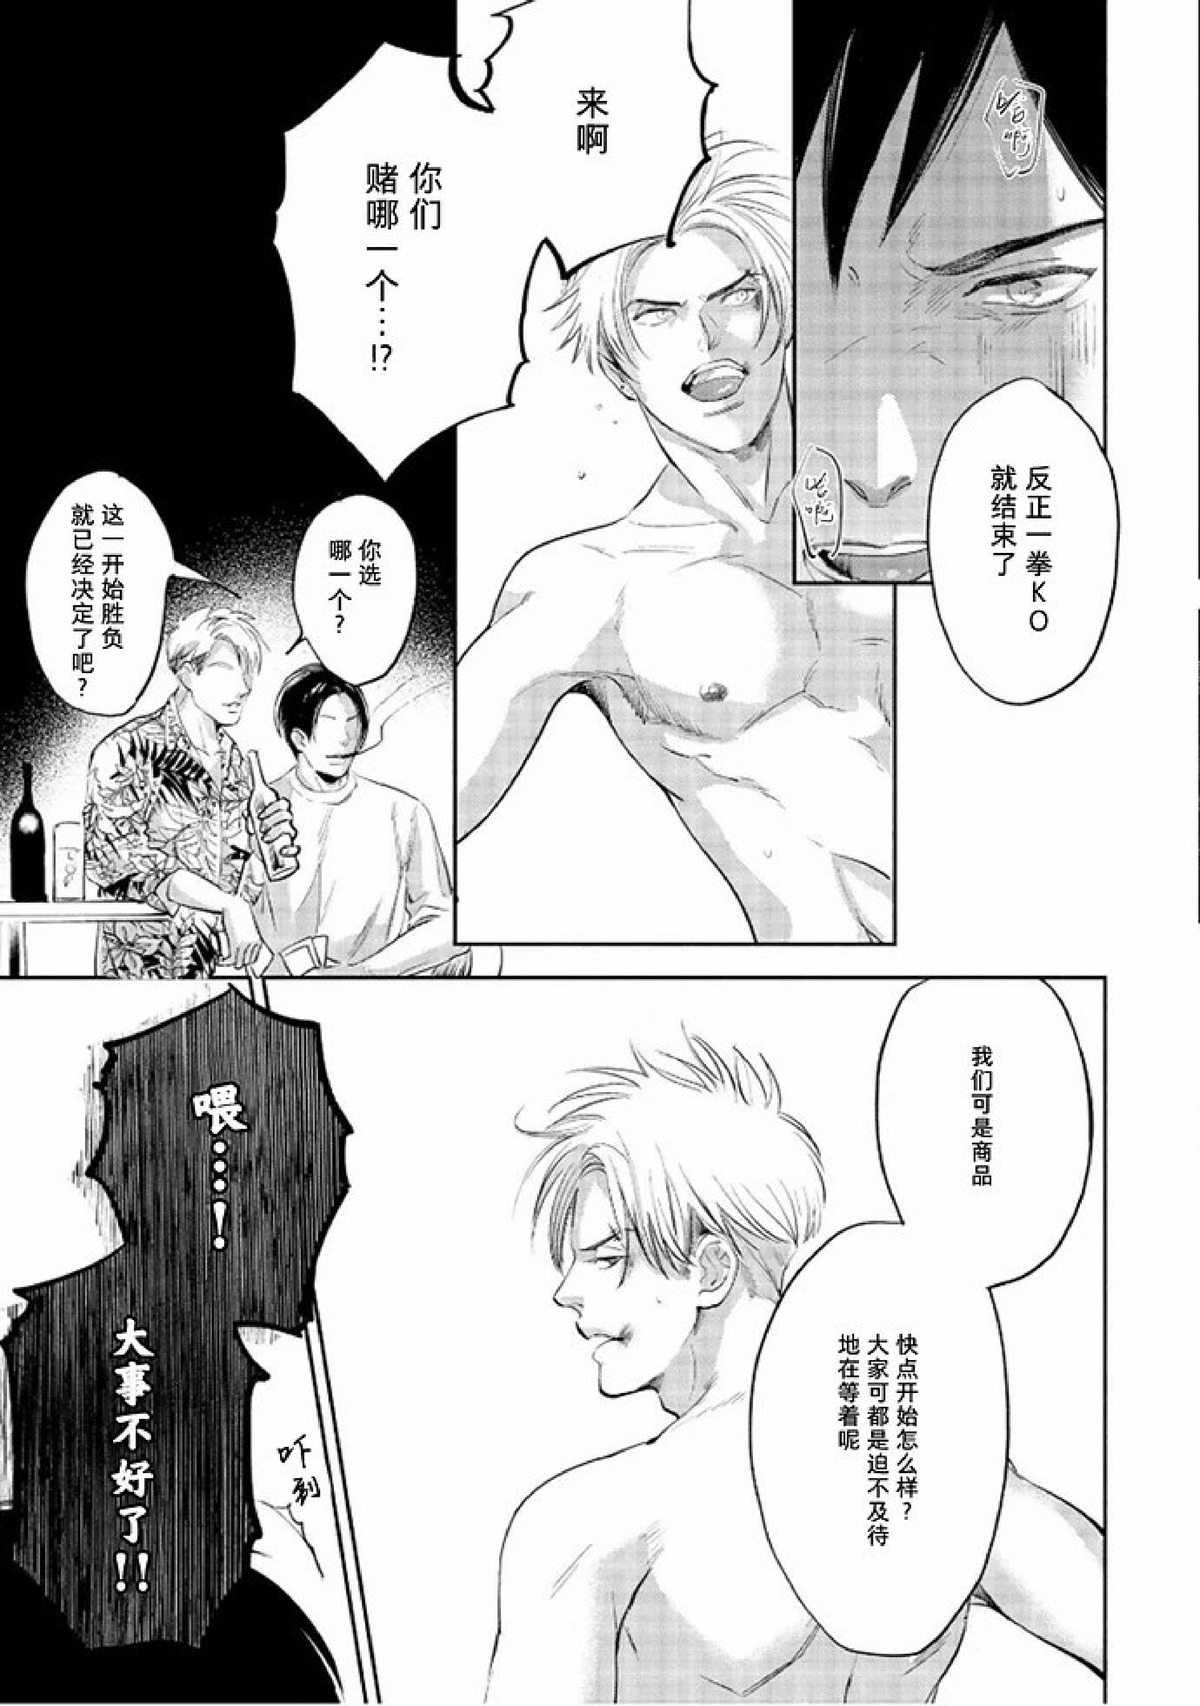 【Two sides of the same coin[耽美]】漫画-（上卷01-02）章节漫画下拉式图片-65.jpg